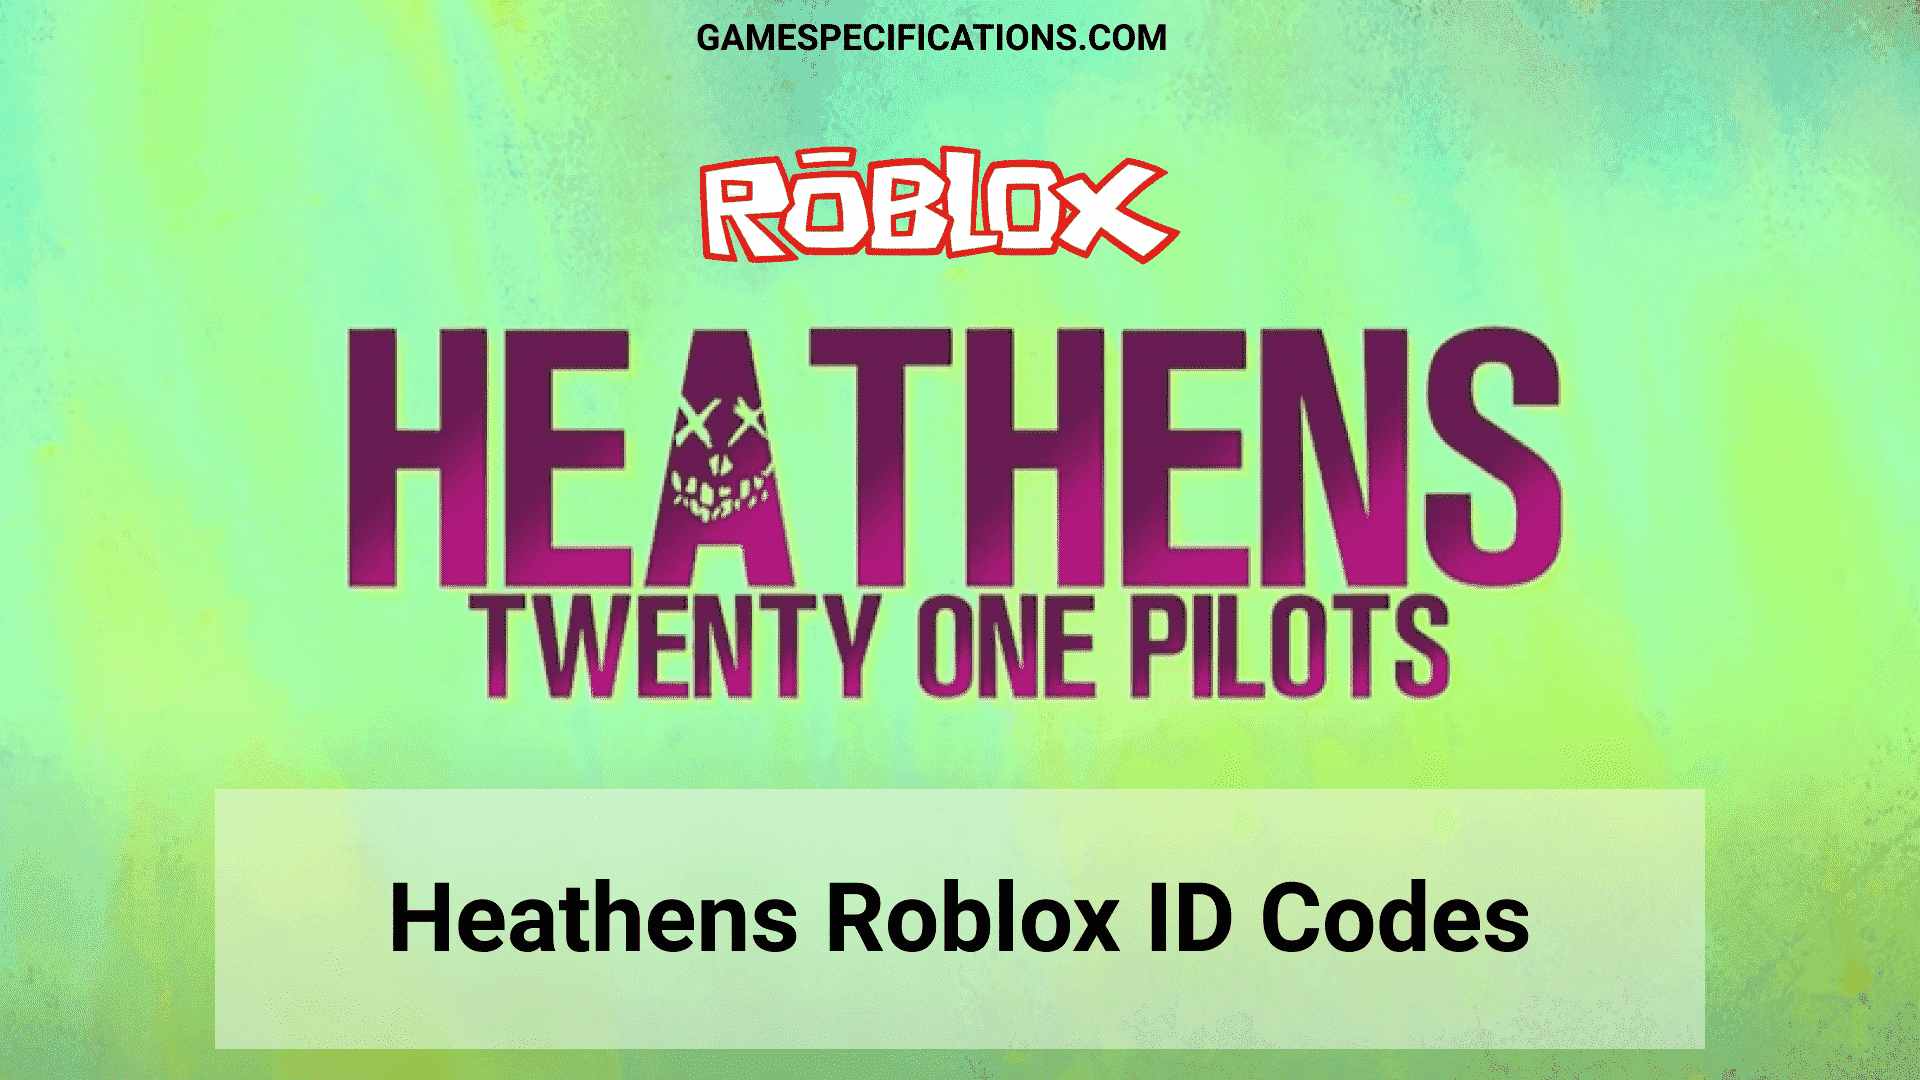 Heathens Roblox Id Codes 2021 Music Codes Game Specifications - fnaf roblox song ids